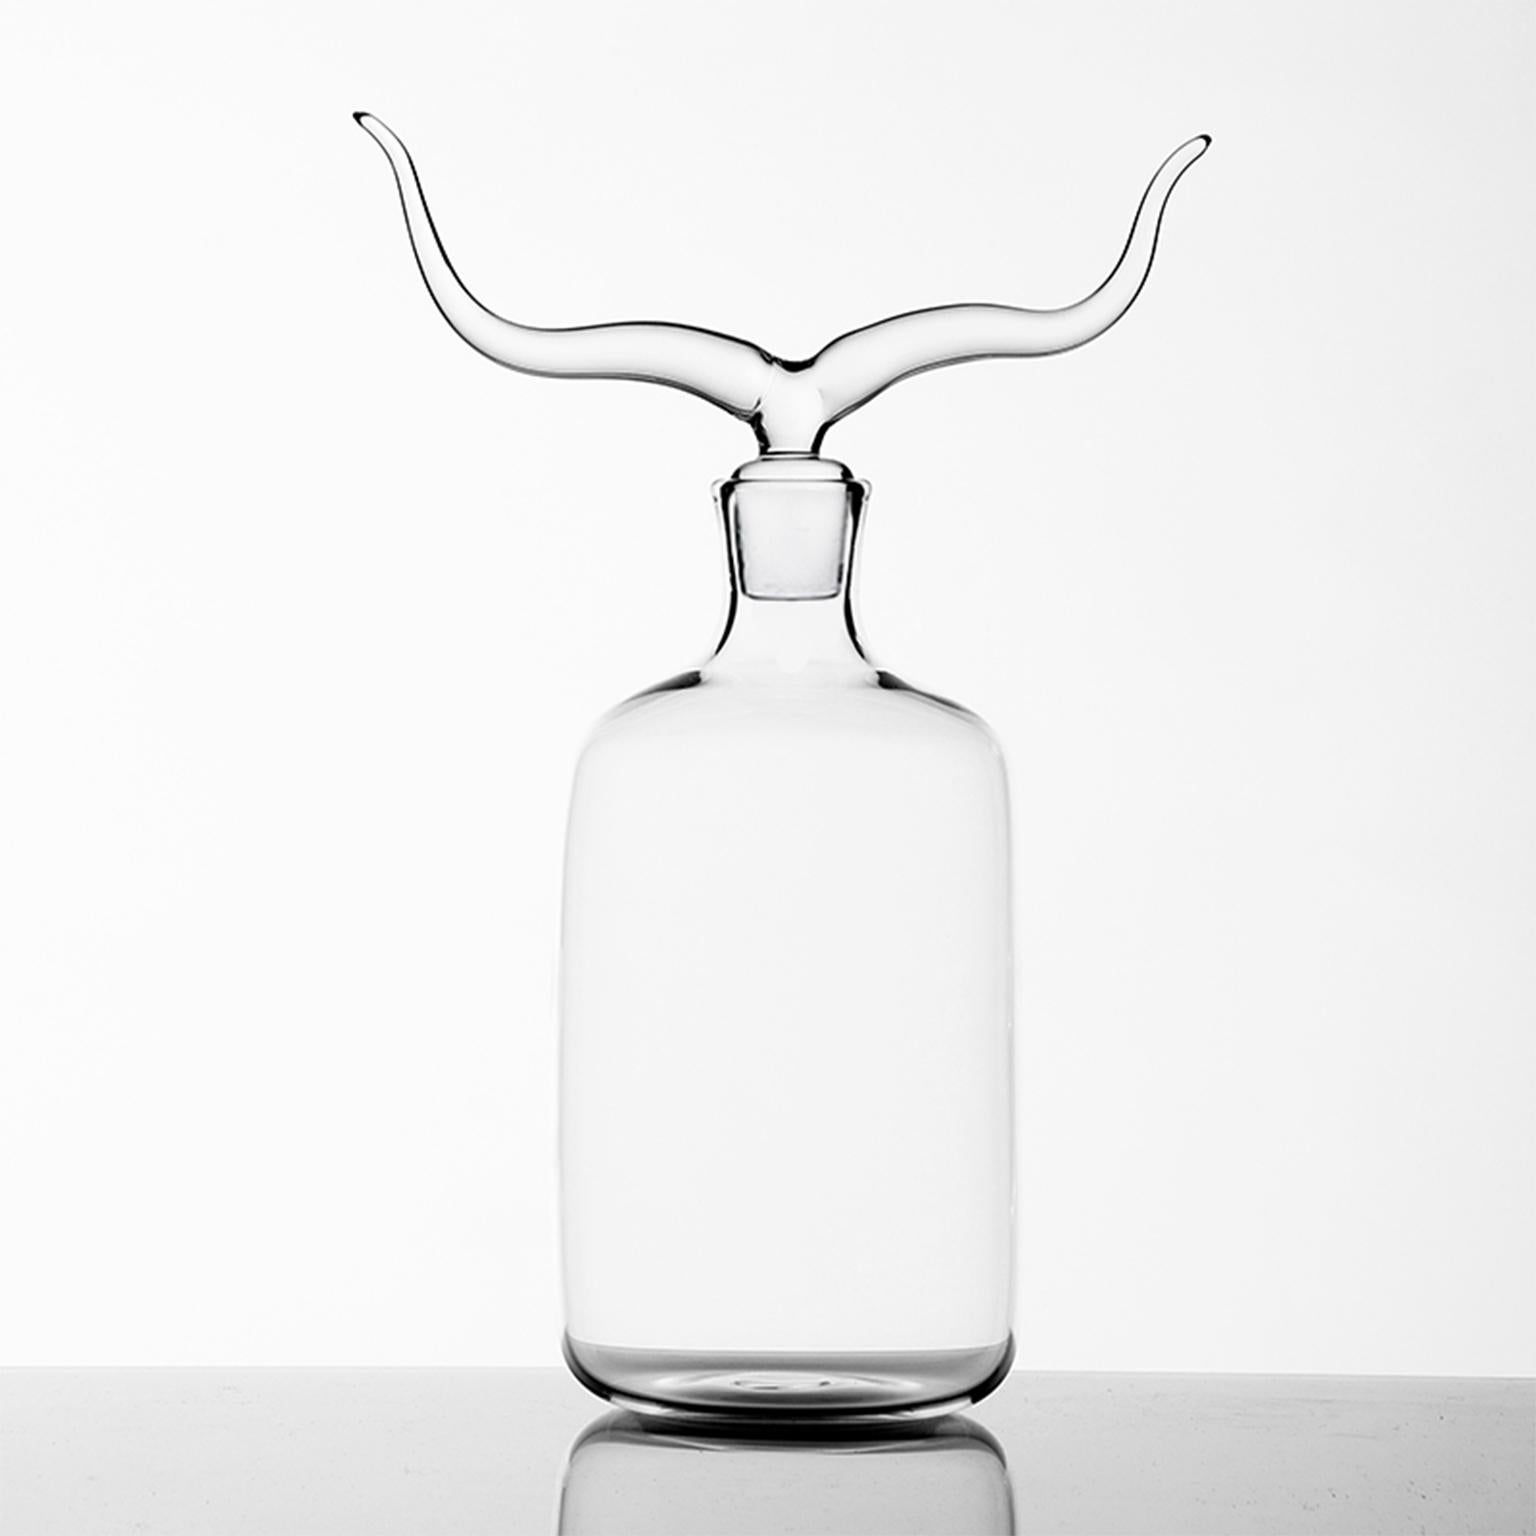 'Longhorn Bottle'
A Hand Blown Glass Bottle by Simone Crestani

Longhorn Bottle is one of the pieces from the Trophy Bottles.

